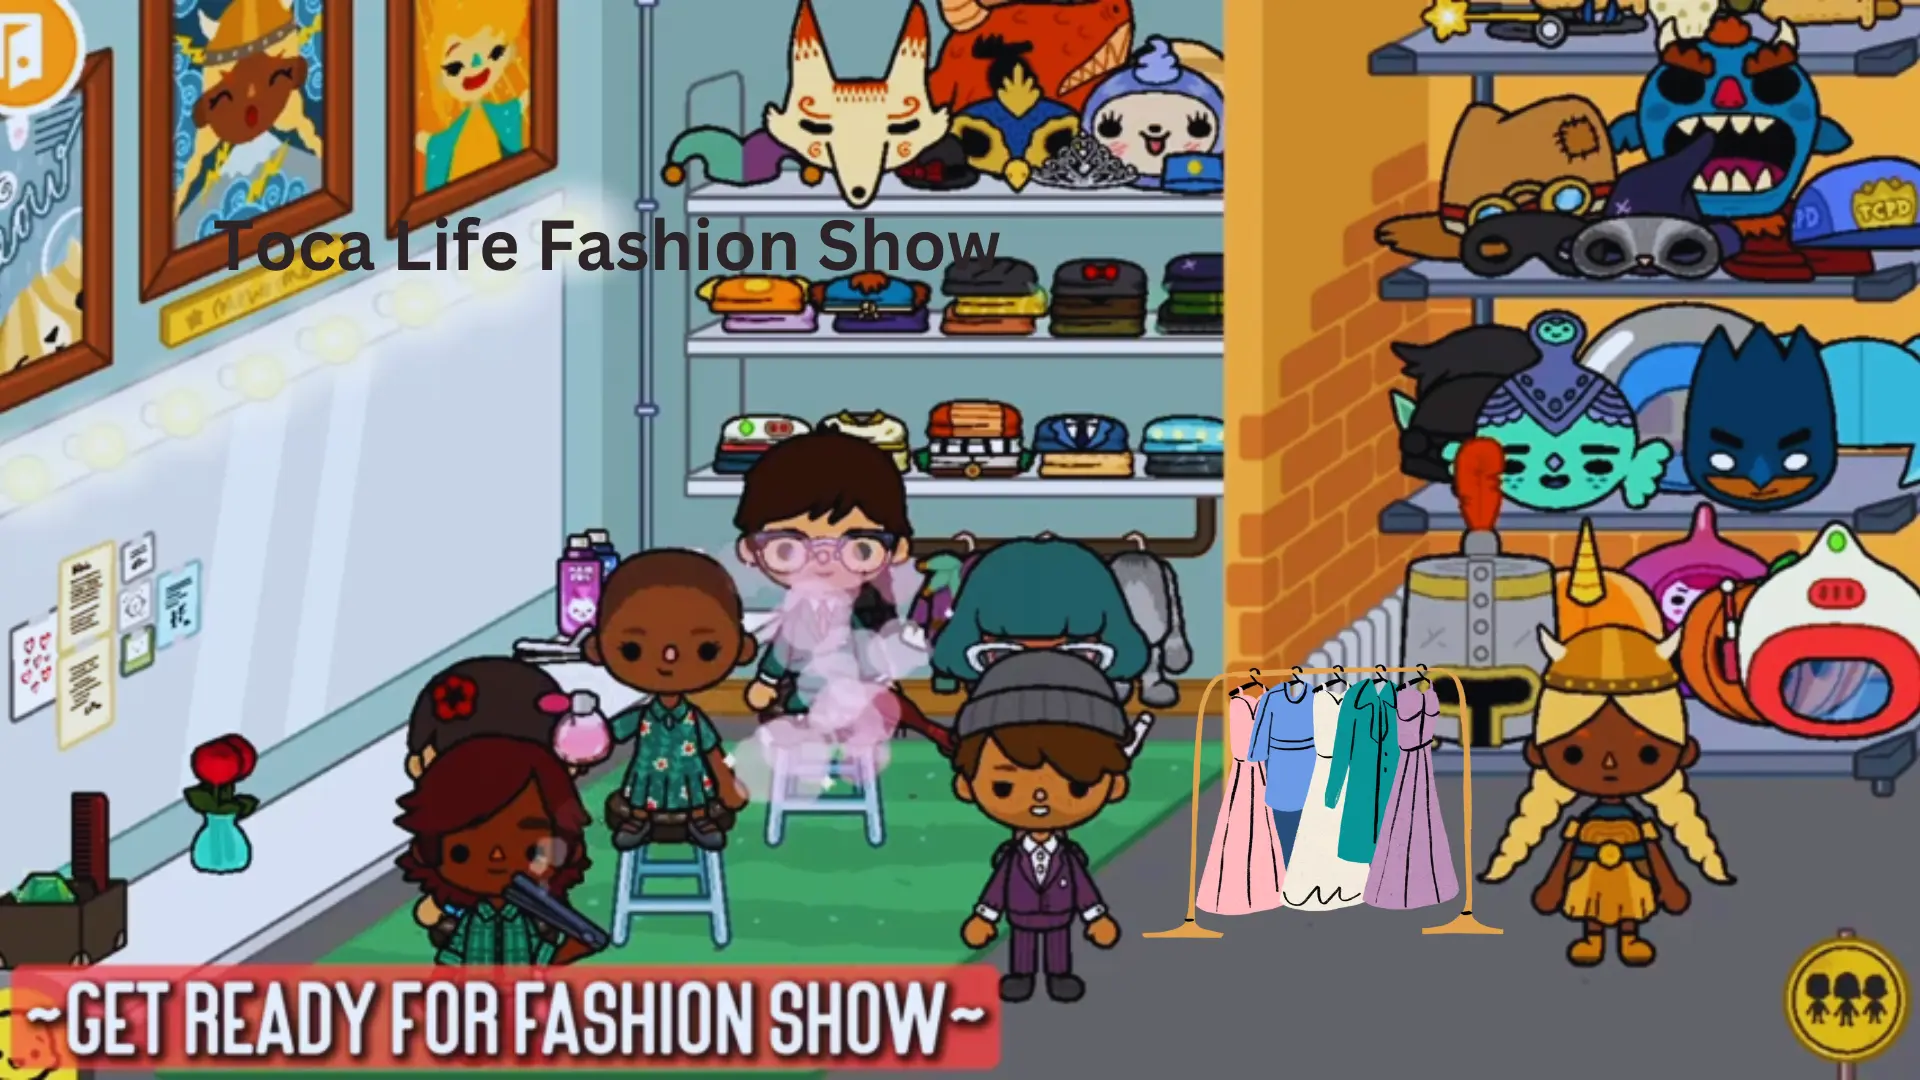 Showcase your style in Toca Life Fashion Show.